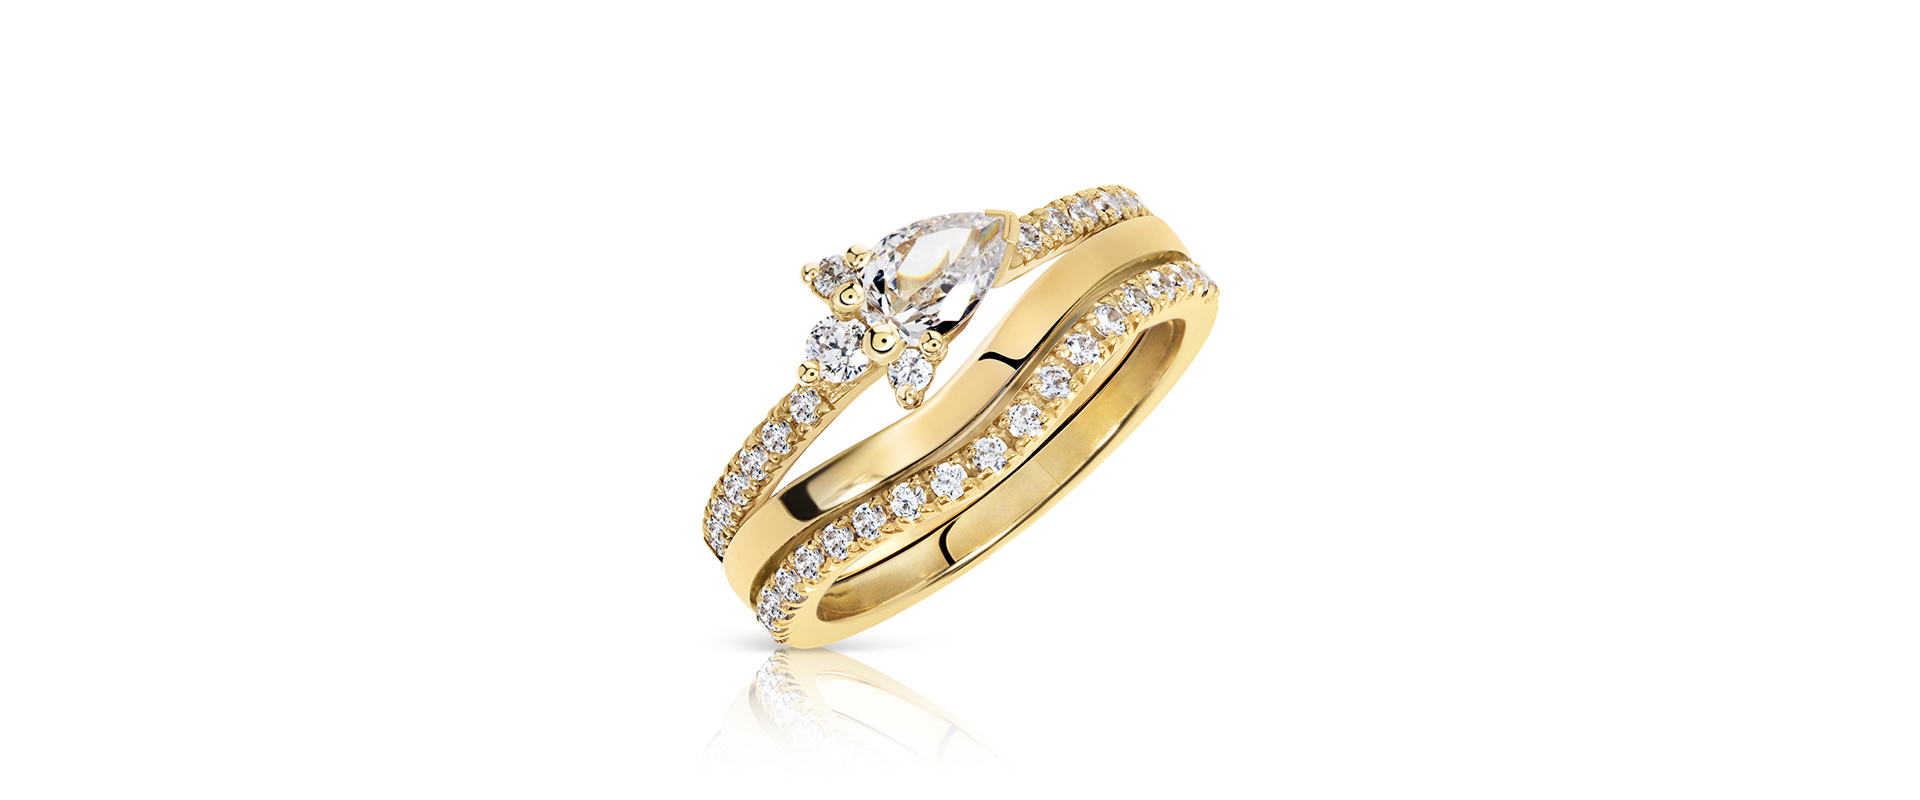 Astral cluster engagement ring 7 white diamond wedding and eternity bands - yellow gold